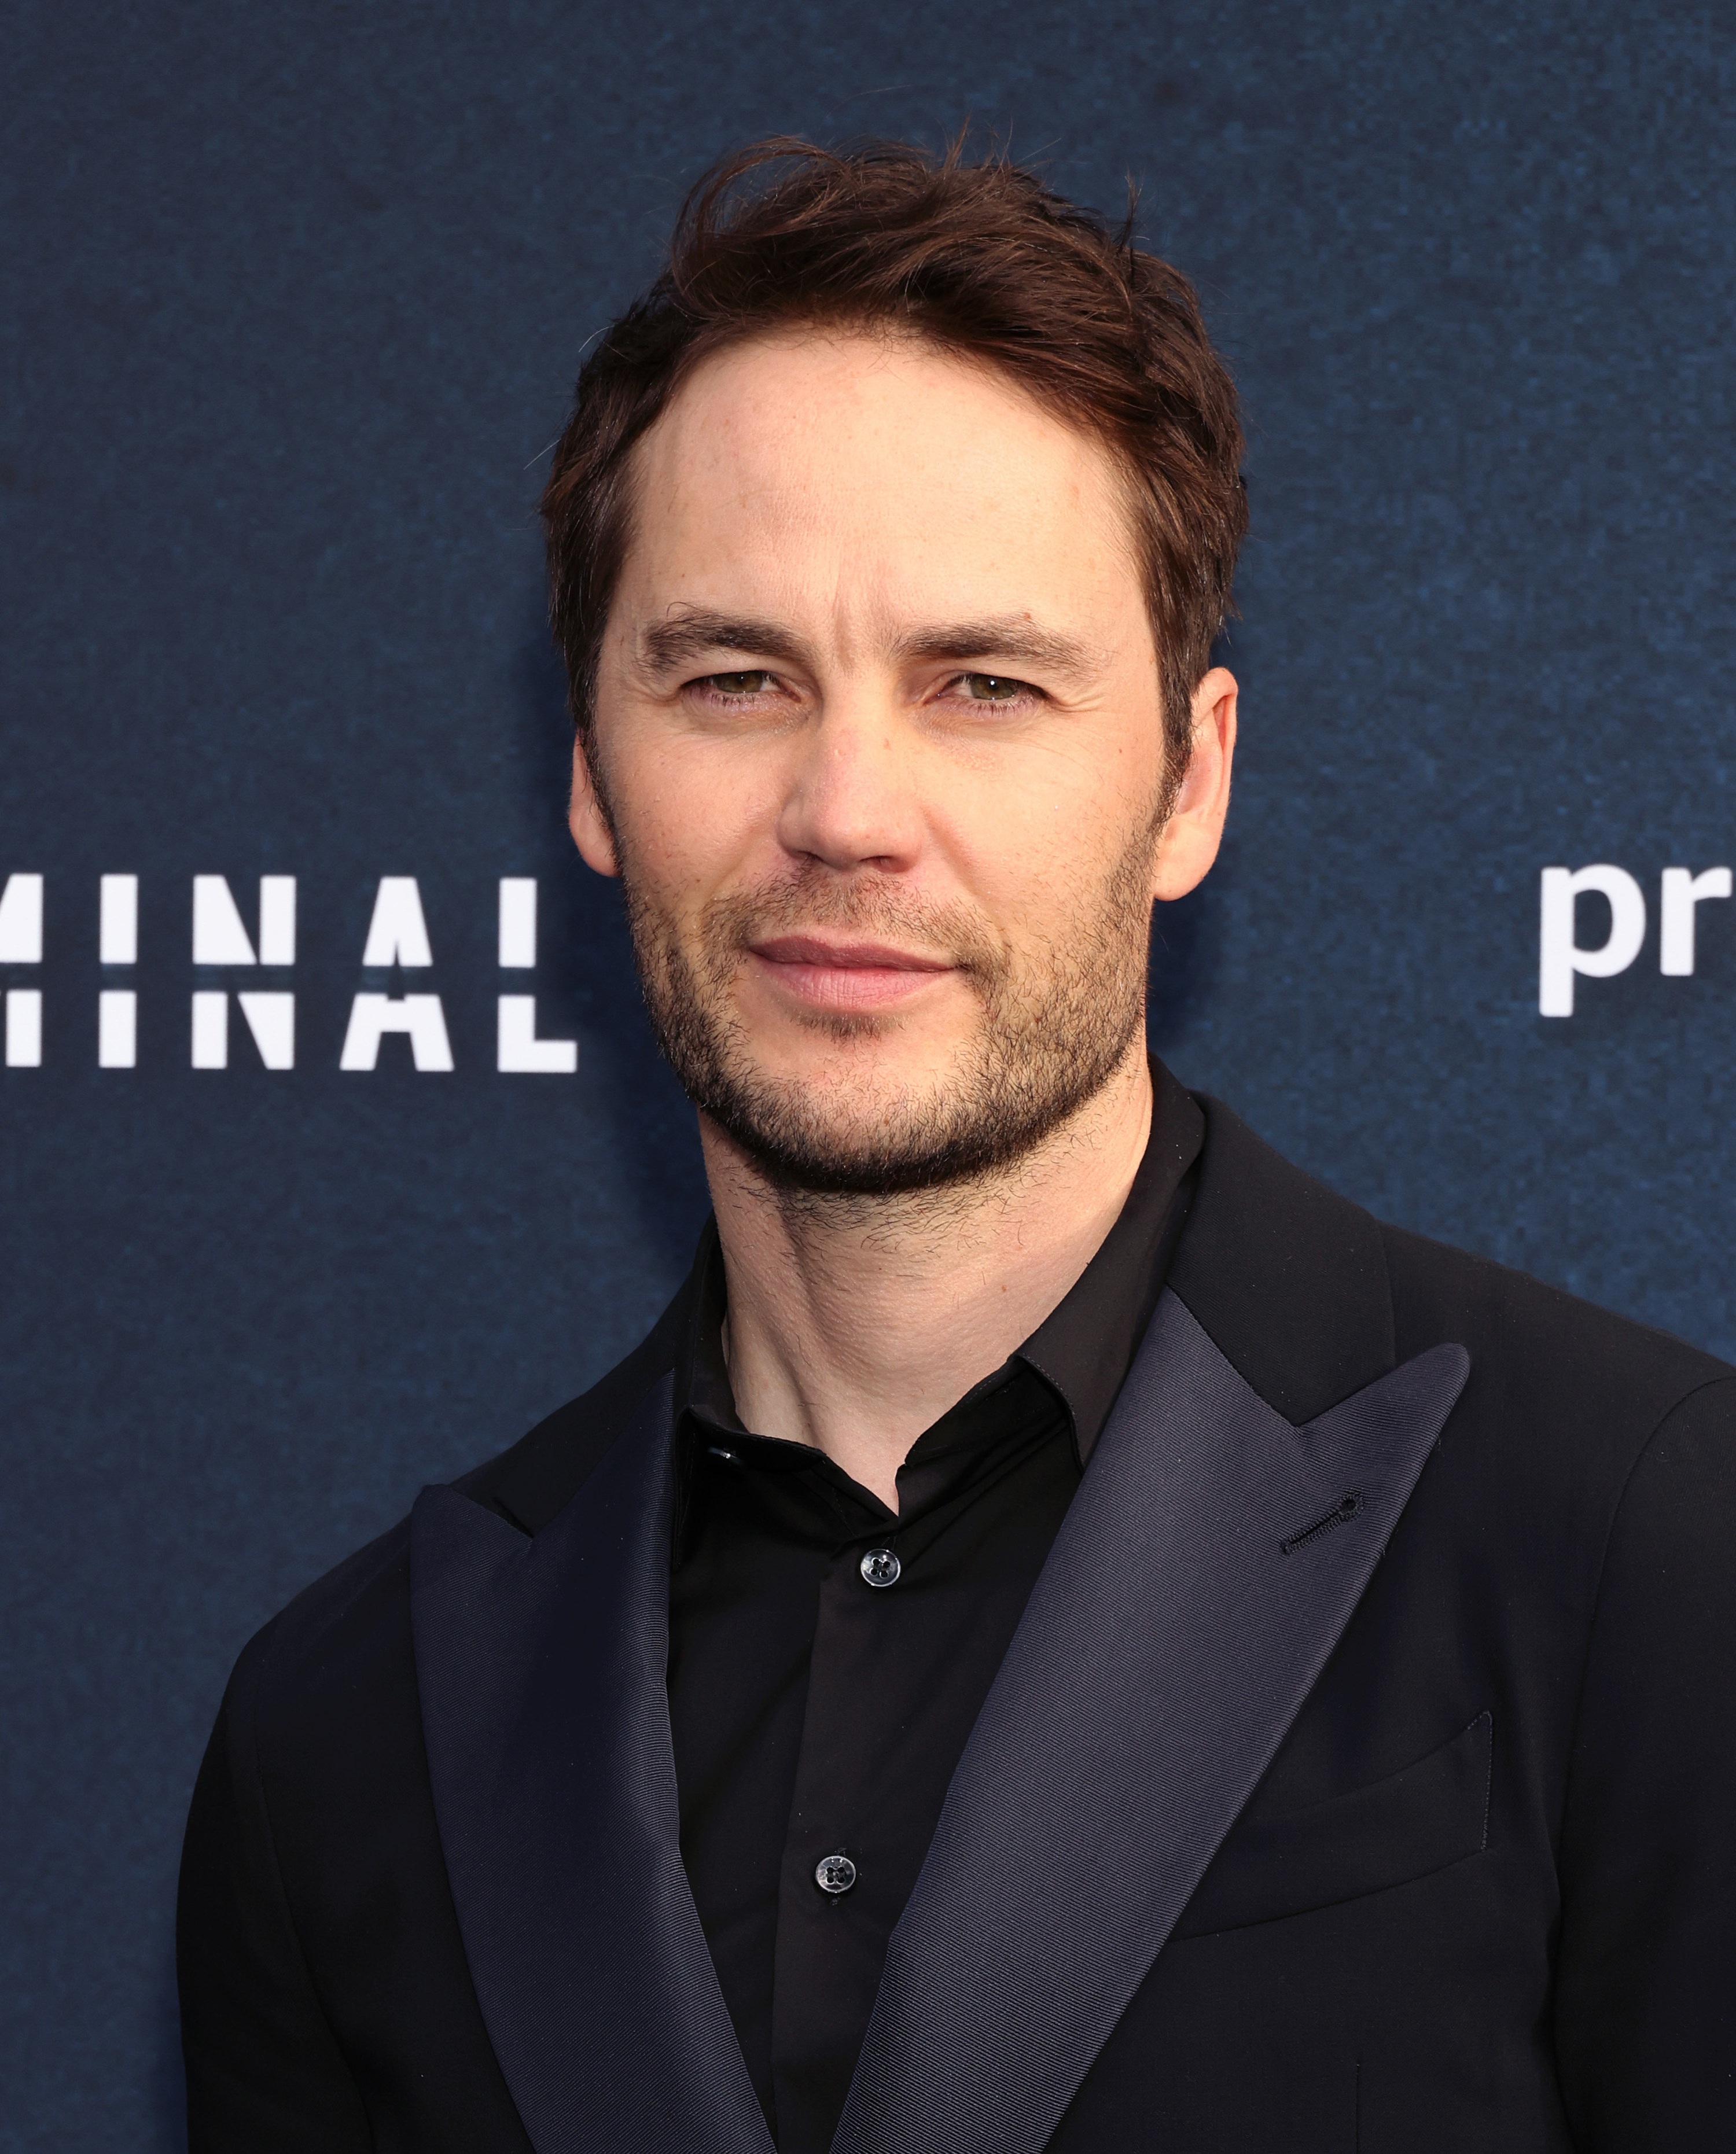 Taylor Kitsch on the red carpet